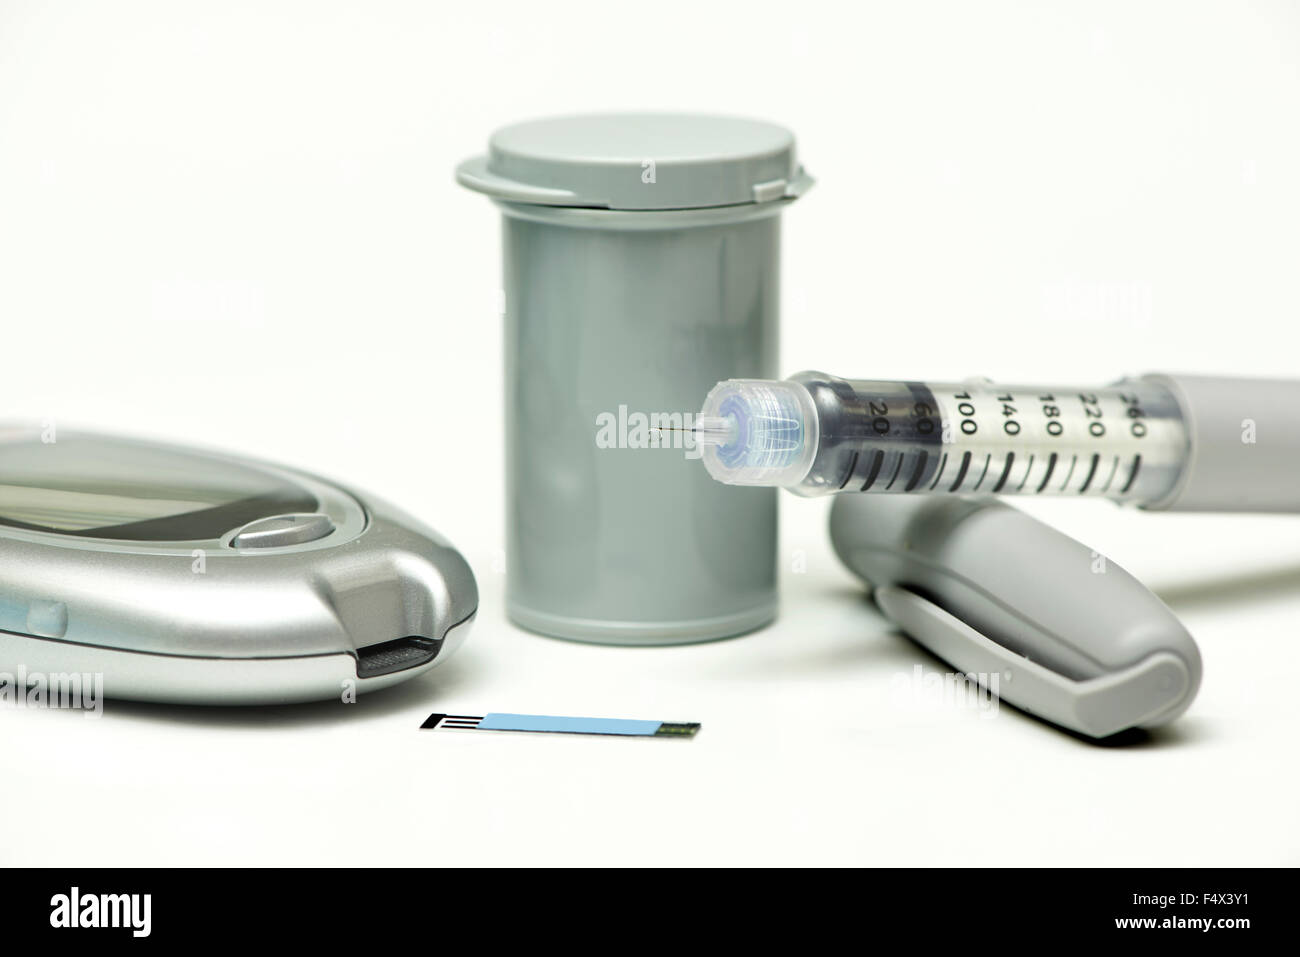 Insulin droplet on insulin pen needle with meter, strip and cannister. Stock Photo